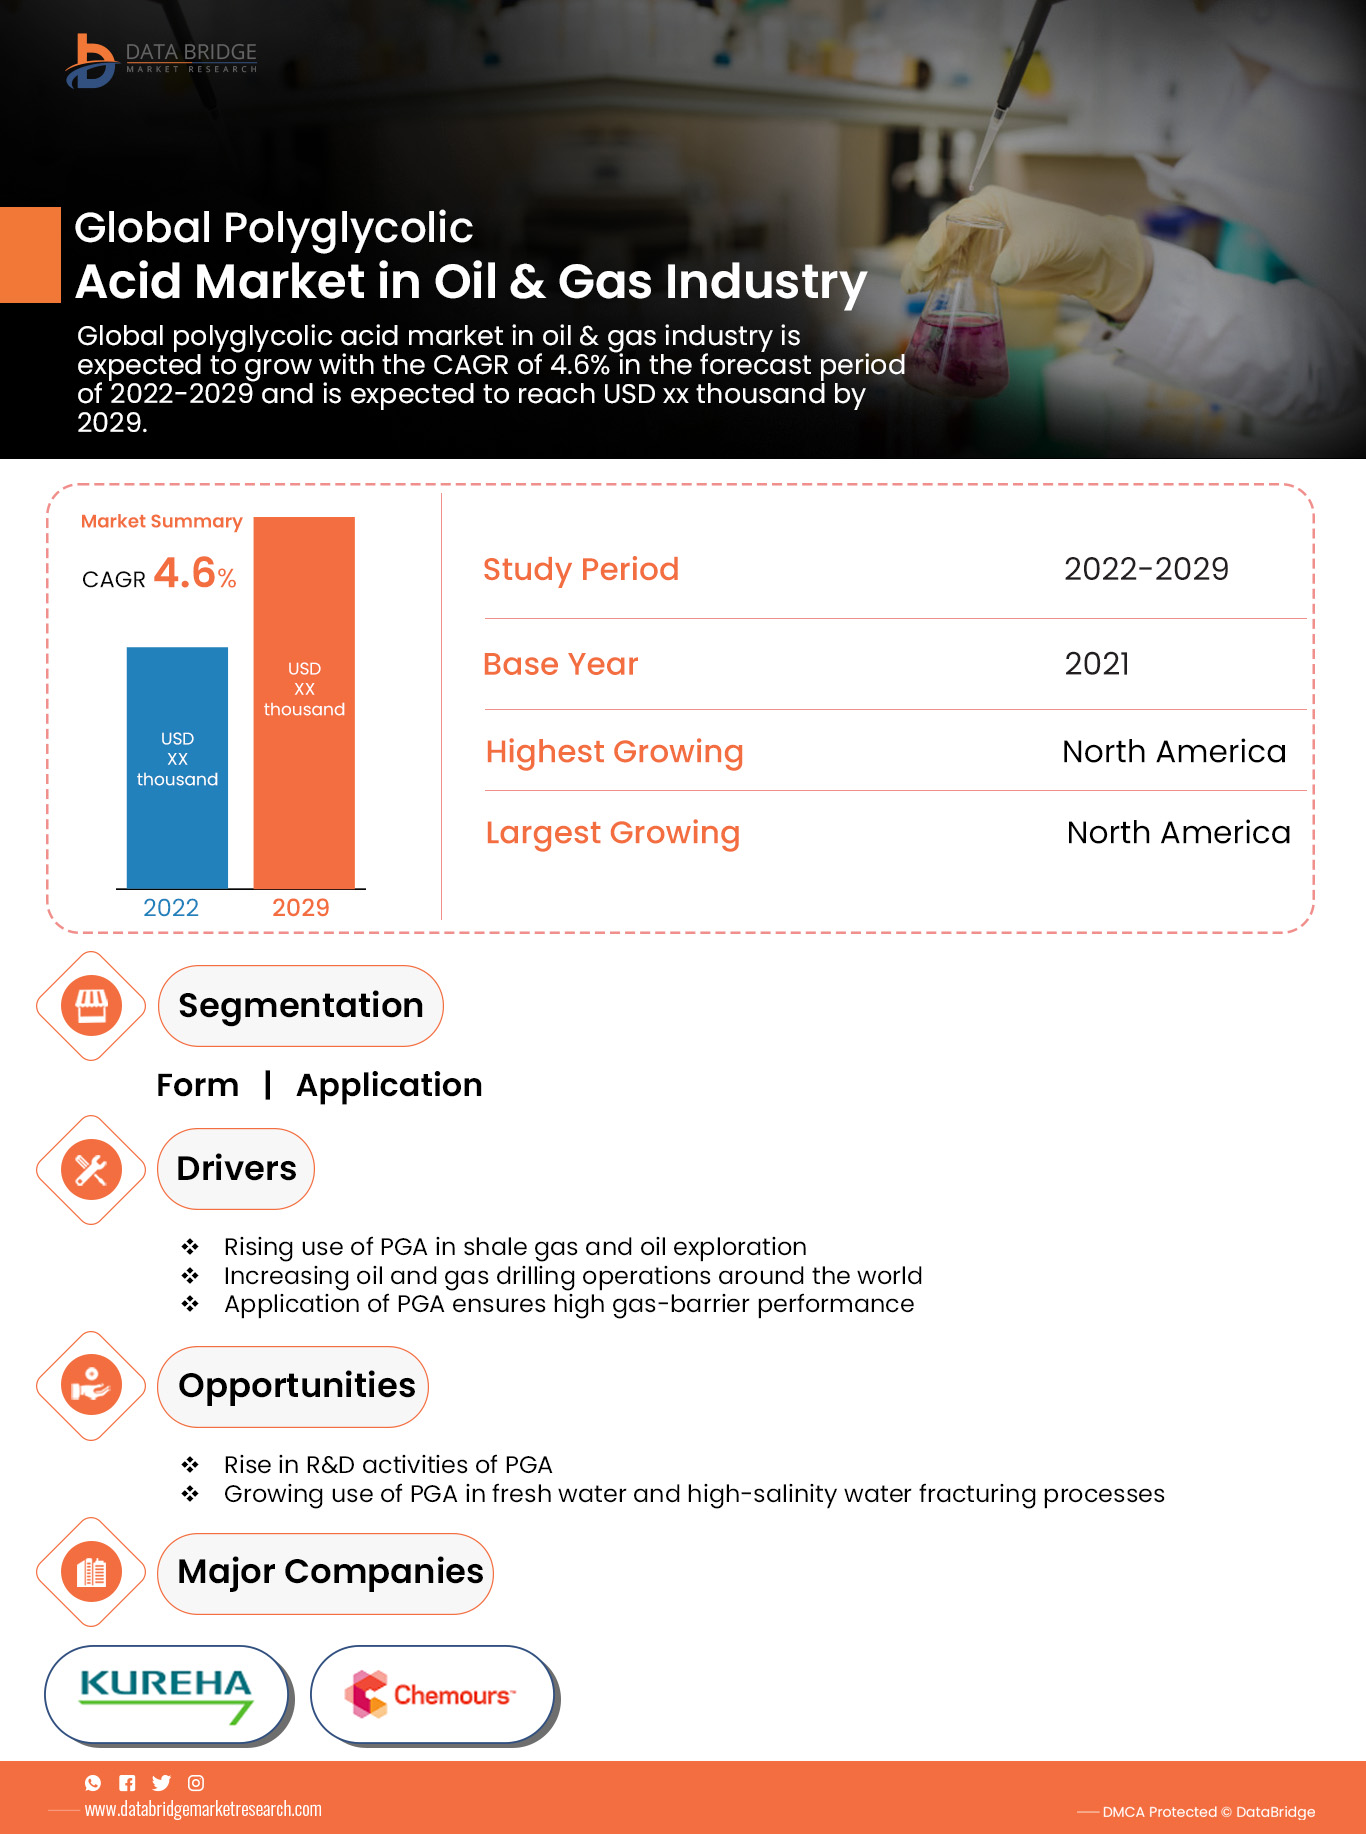 Polyglycolic Acid Market in Oil & Gas Industry